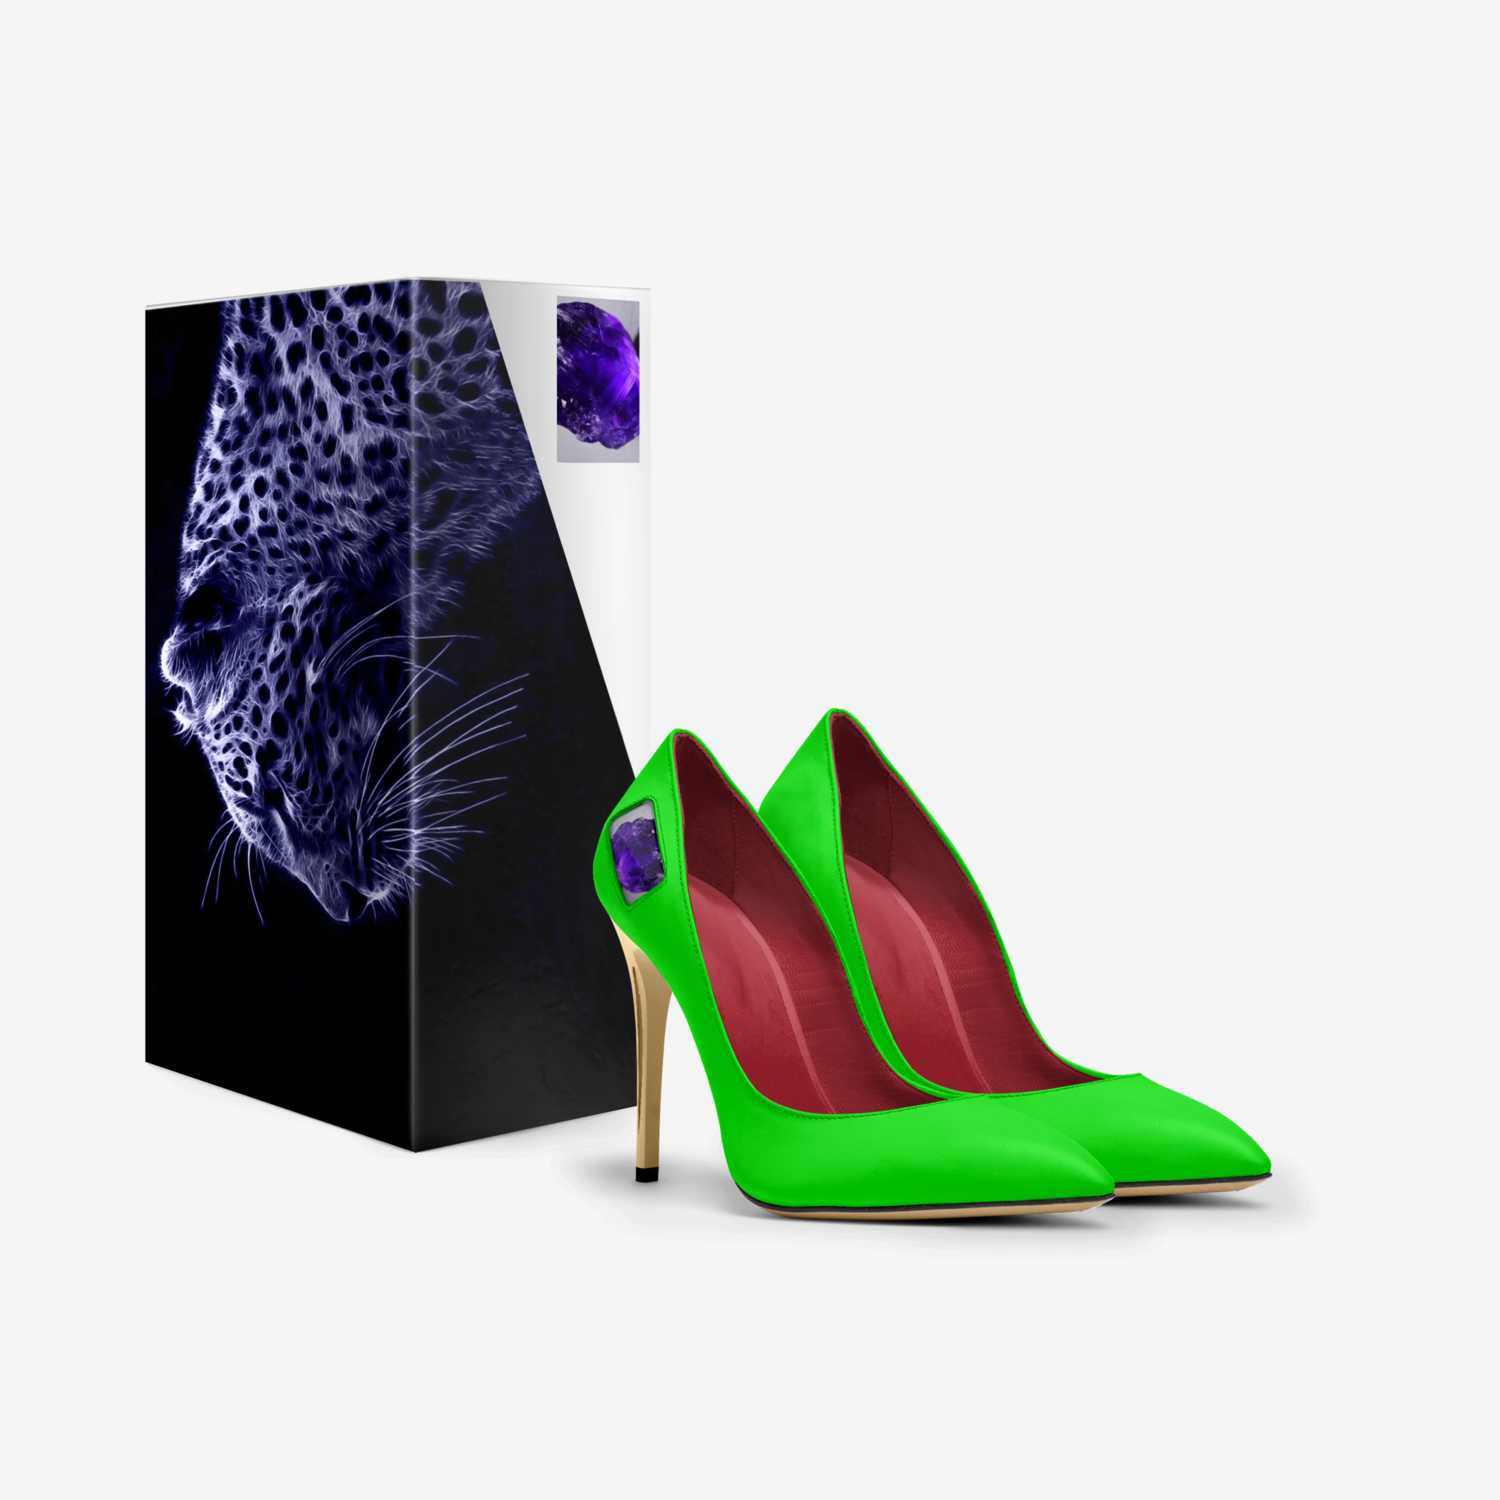 African royal heel custom made in Italy shoes by Cedric Harris | Box view